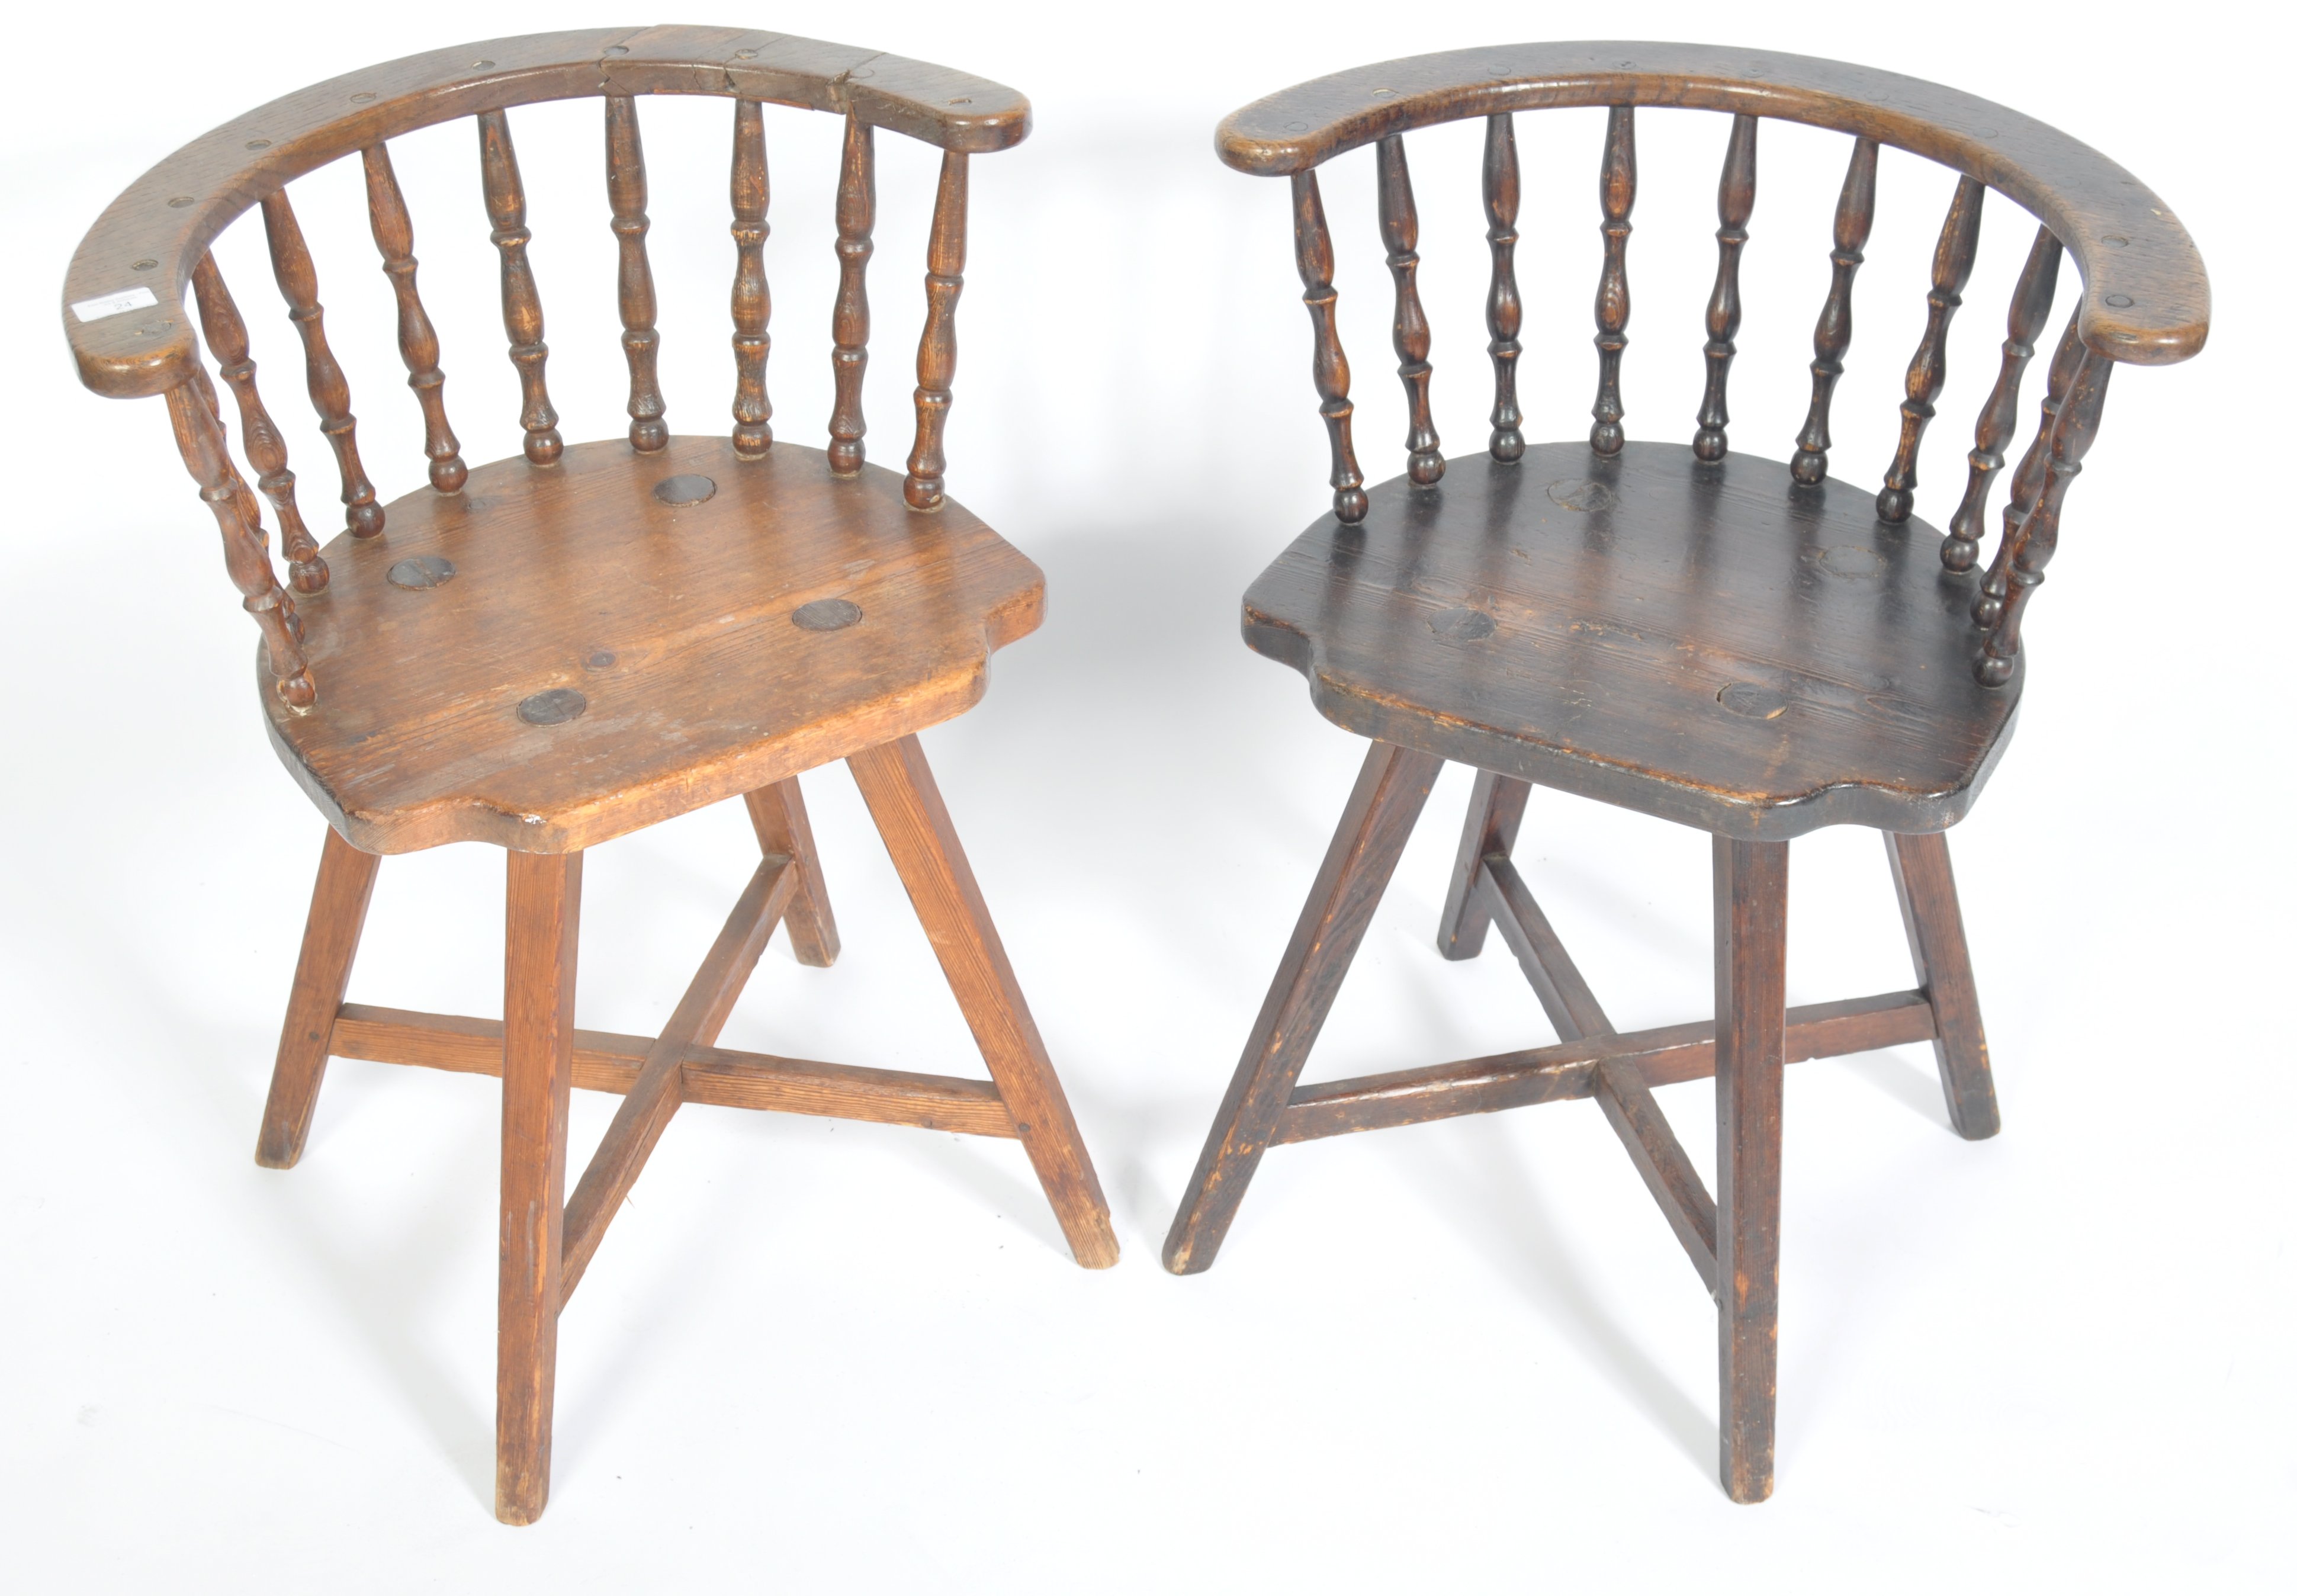 PAIR OF 19TH CENTURY PINE COUNTRY TAVERN PUB CHAIRS - Image 2 of 5